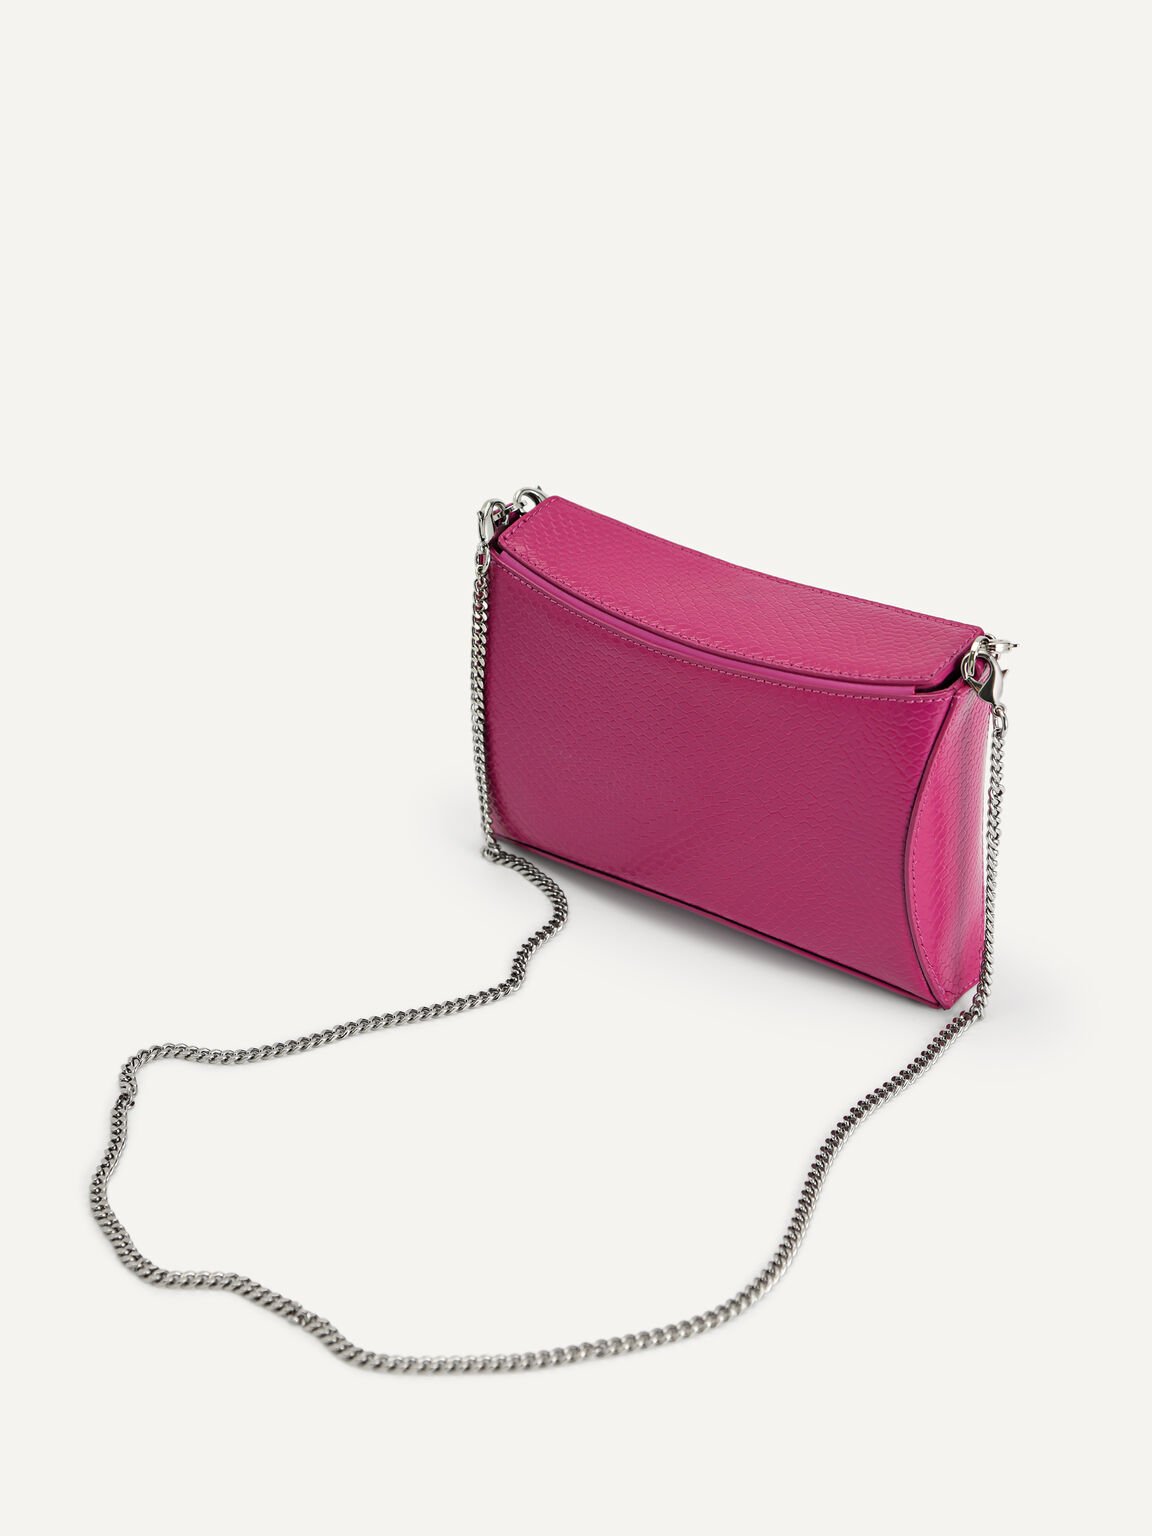 Chain Detailed Snake-Effect Leather Clutch, Fuchsia, hi-res